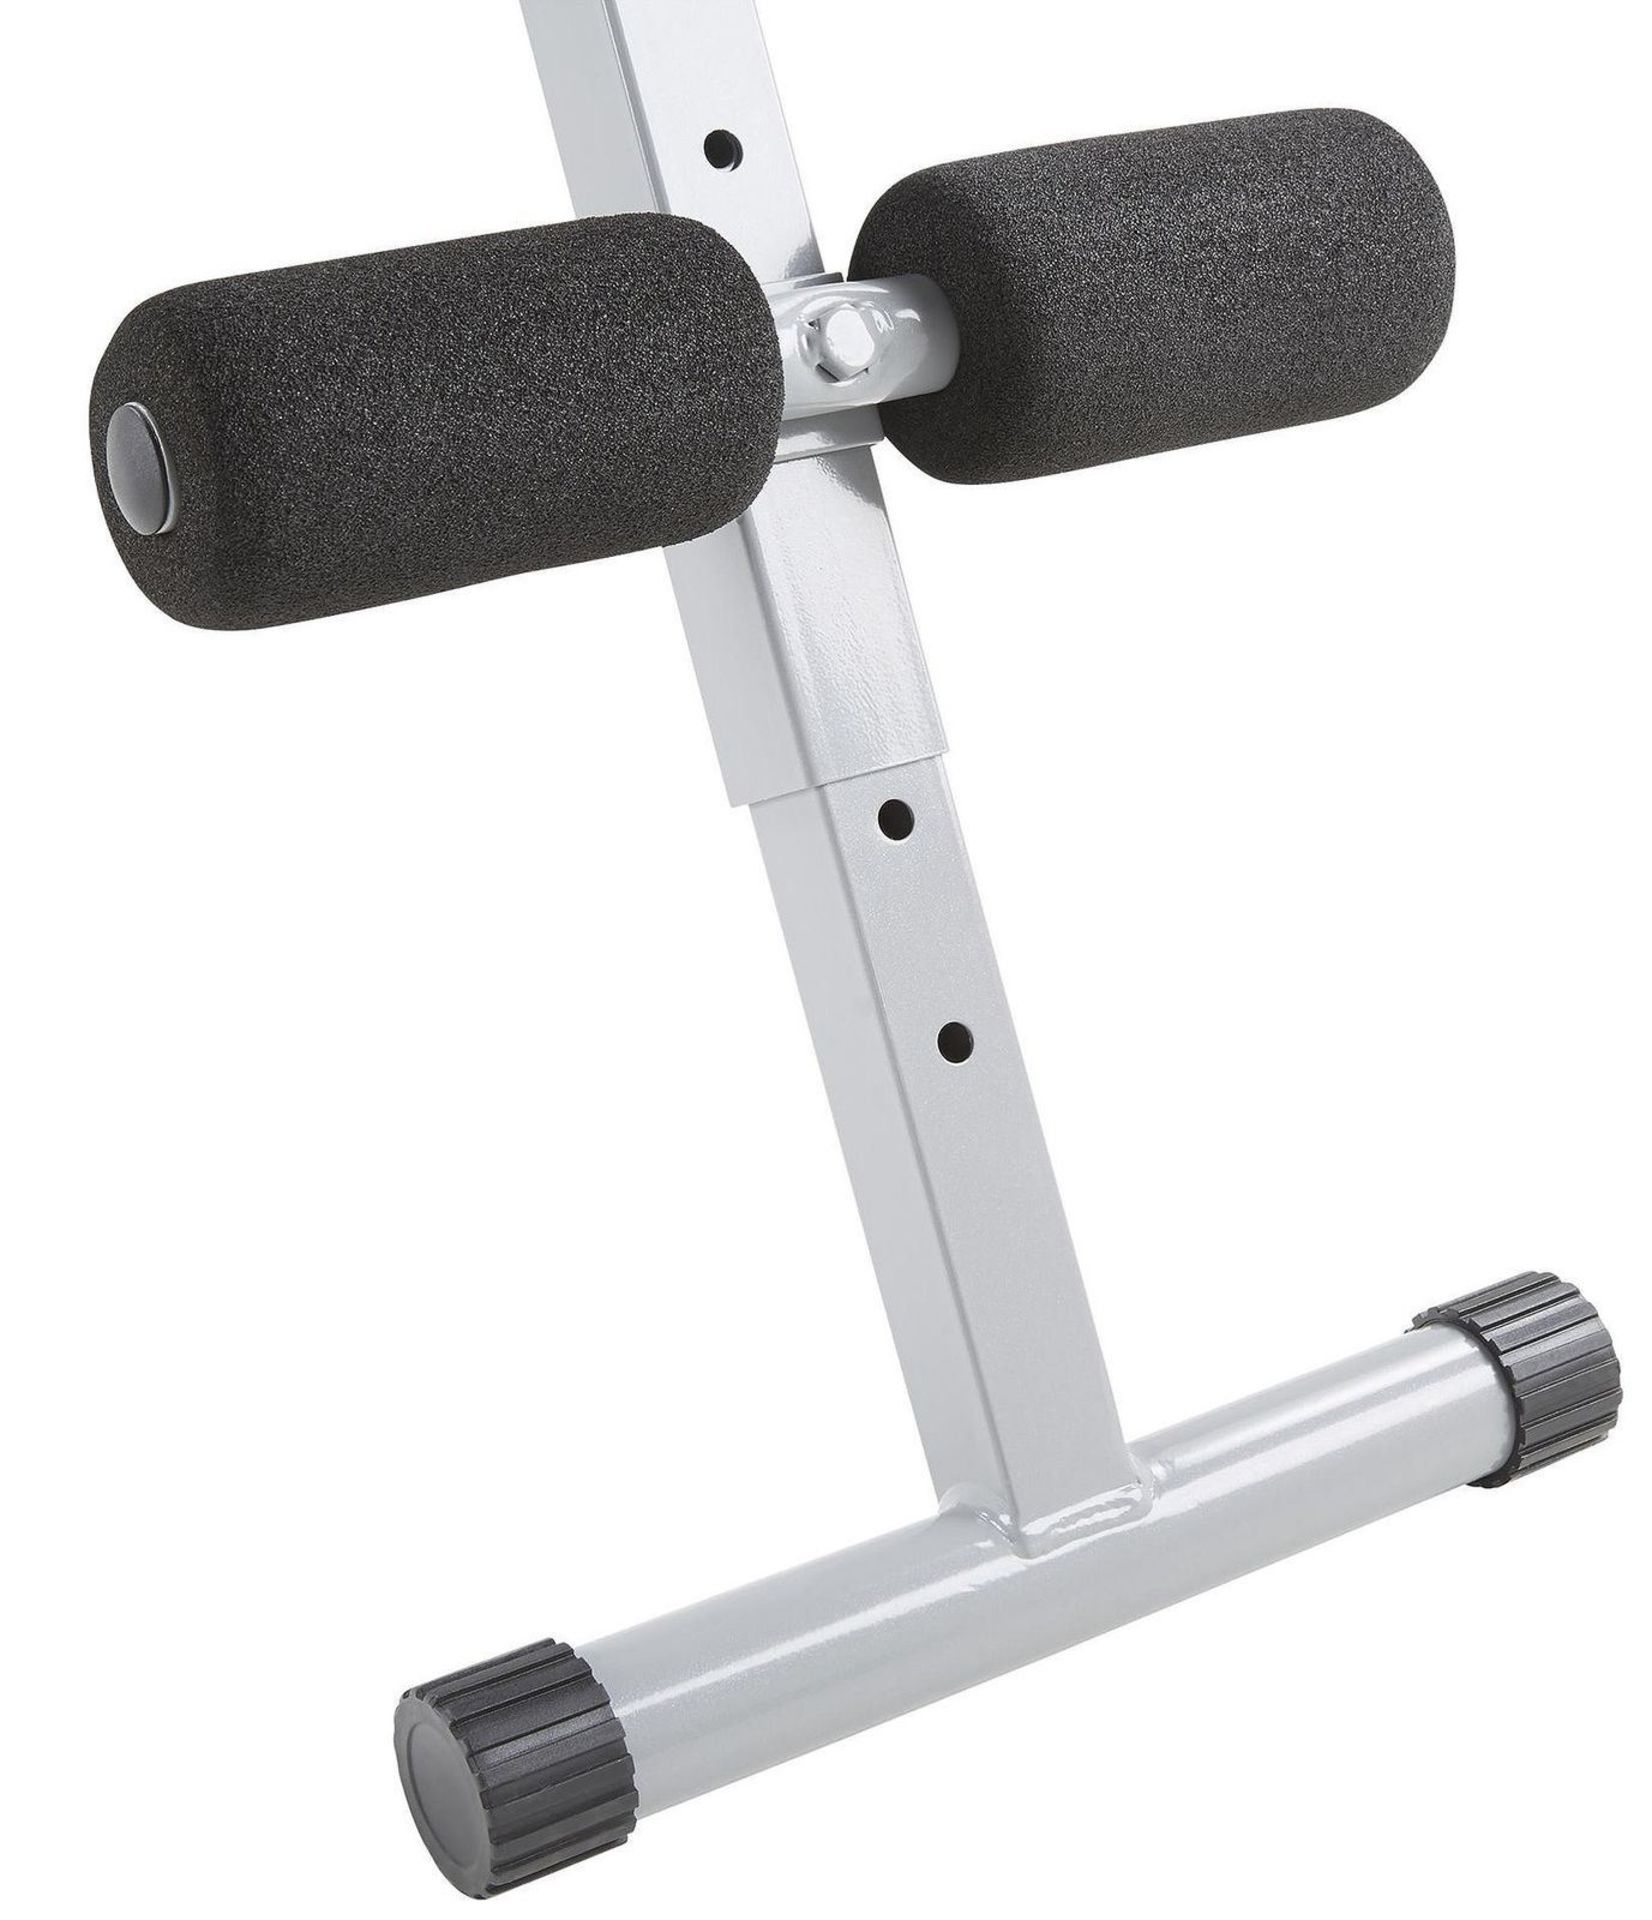 + VAT Brand New 2 in 1 Incline/Sit Up Bench - Tesco Price £35.00 - Image 3 of 3